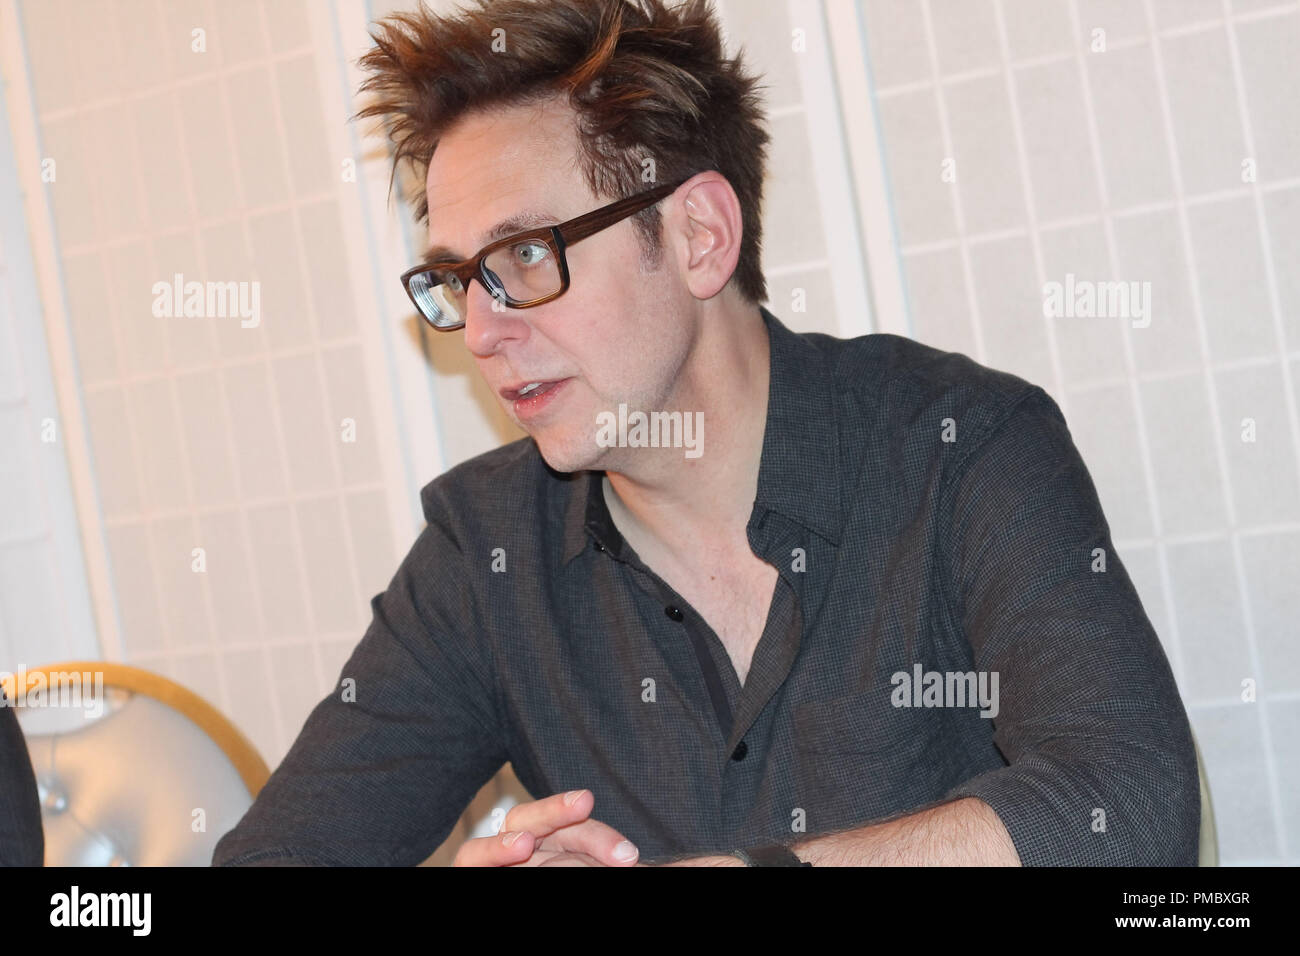 Director James Gunn at 'Guardians of the Galaxy Vol. 2' Press Conference held on April 20, 2017 at the London Hotel in West Hollywood,  California. No Tabloids. No USA sales for 30 days of origination.  File Reference # 33297 016JRC  For Editorial Use Only -  All Rights Reserved Stock Photo